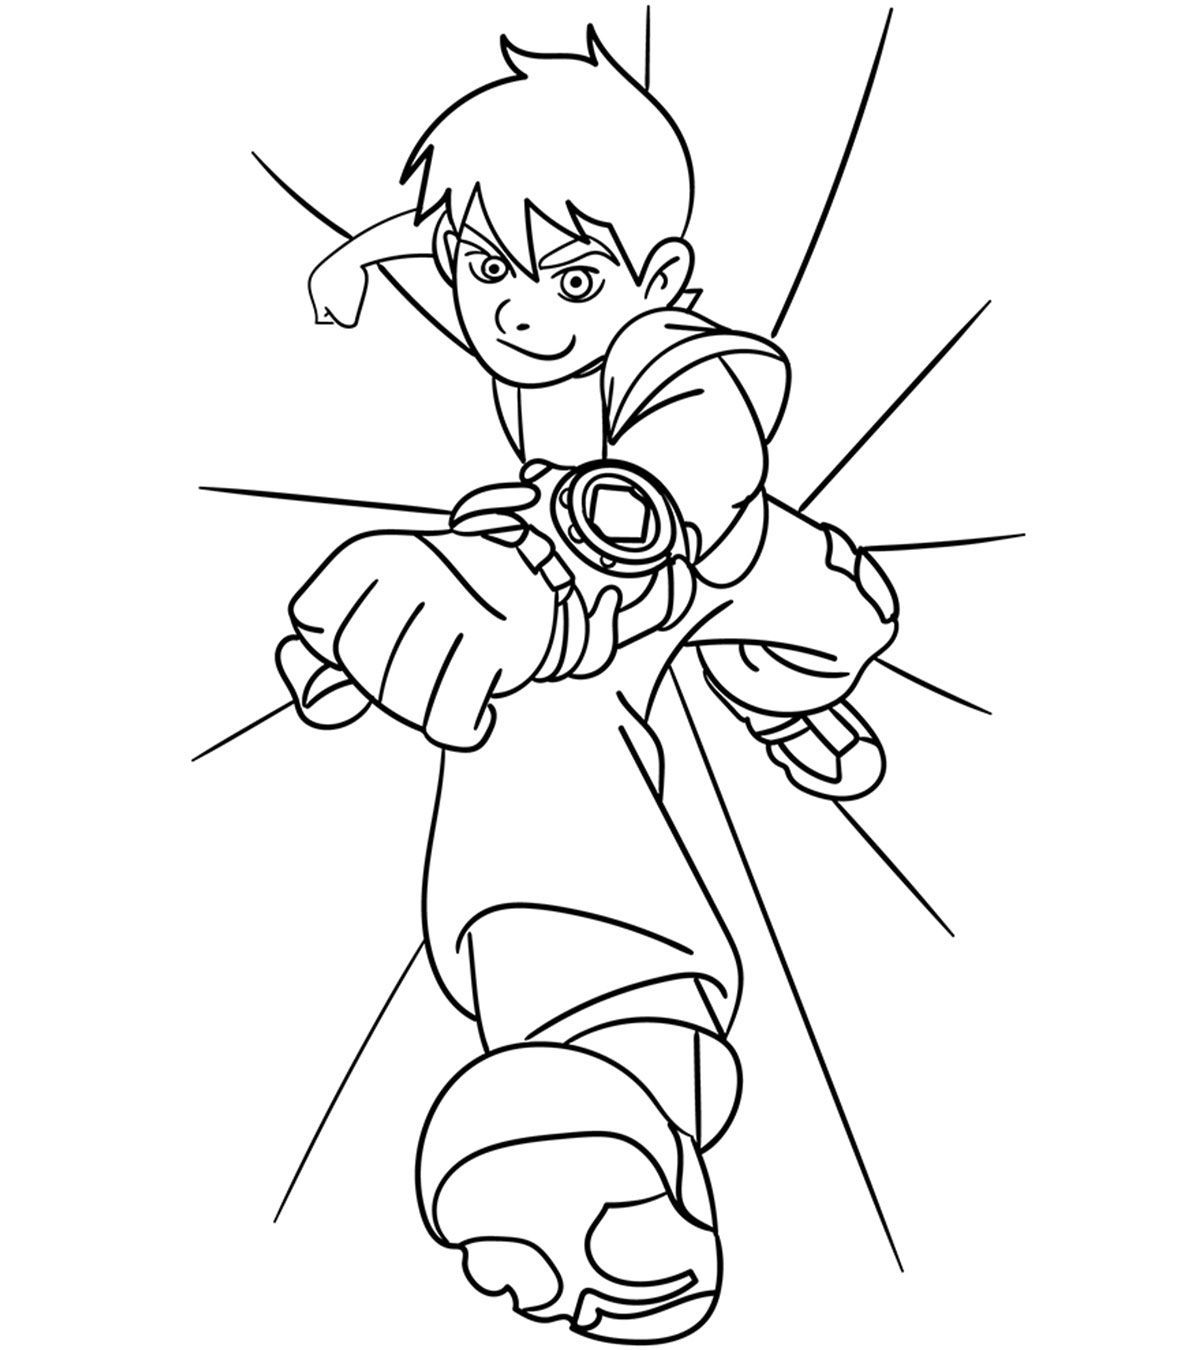 Ben 10 Coloring Pages Online Ben 10 Coloring Pages 20 Free Printable For Little Ones